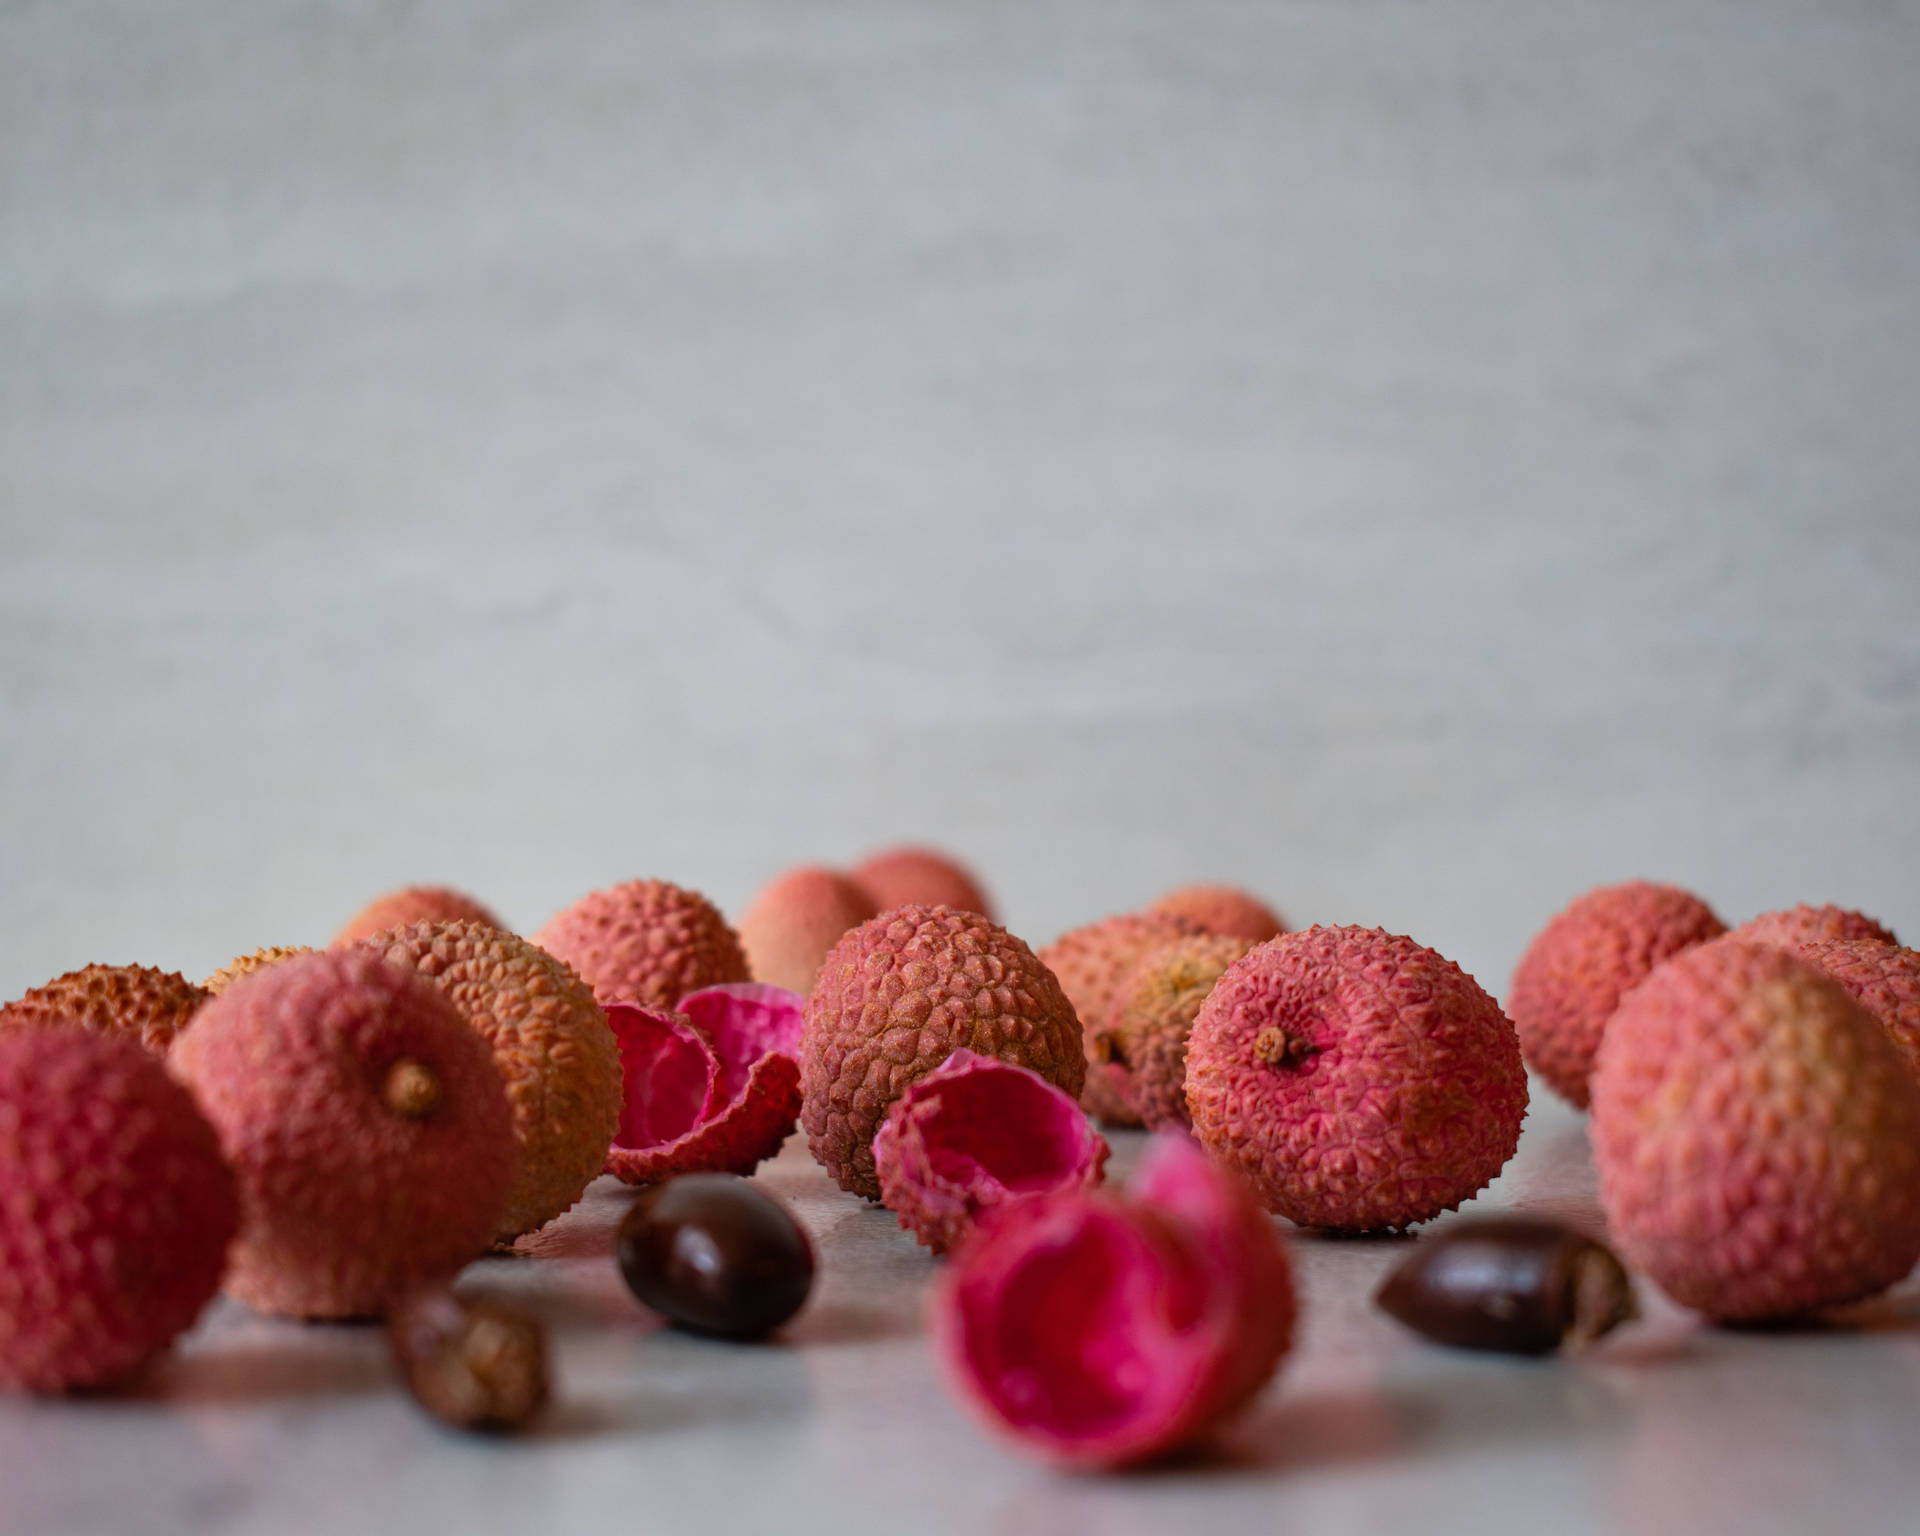 Aesthetic Litchi Fruits And Seeds